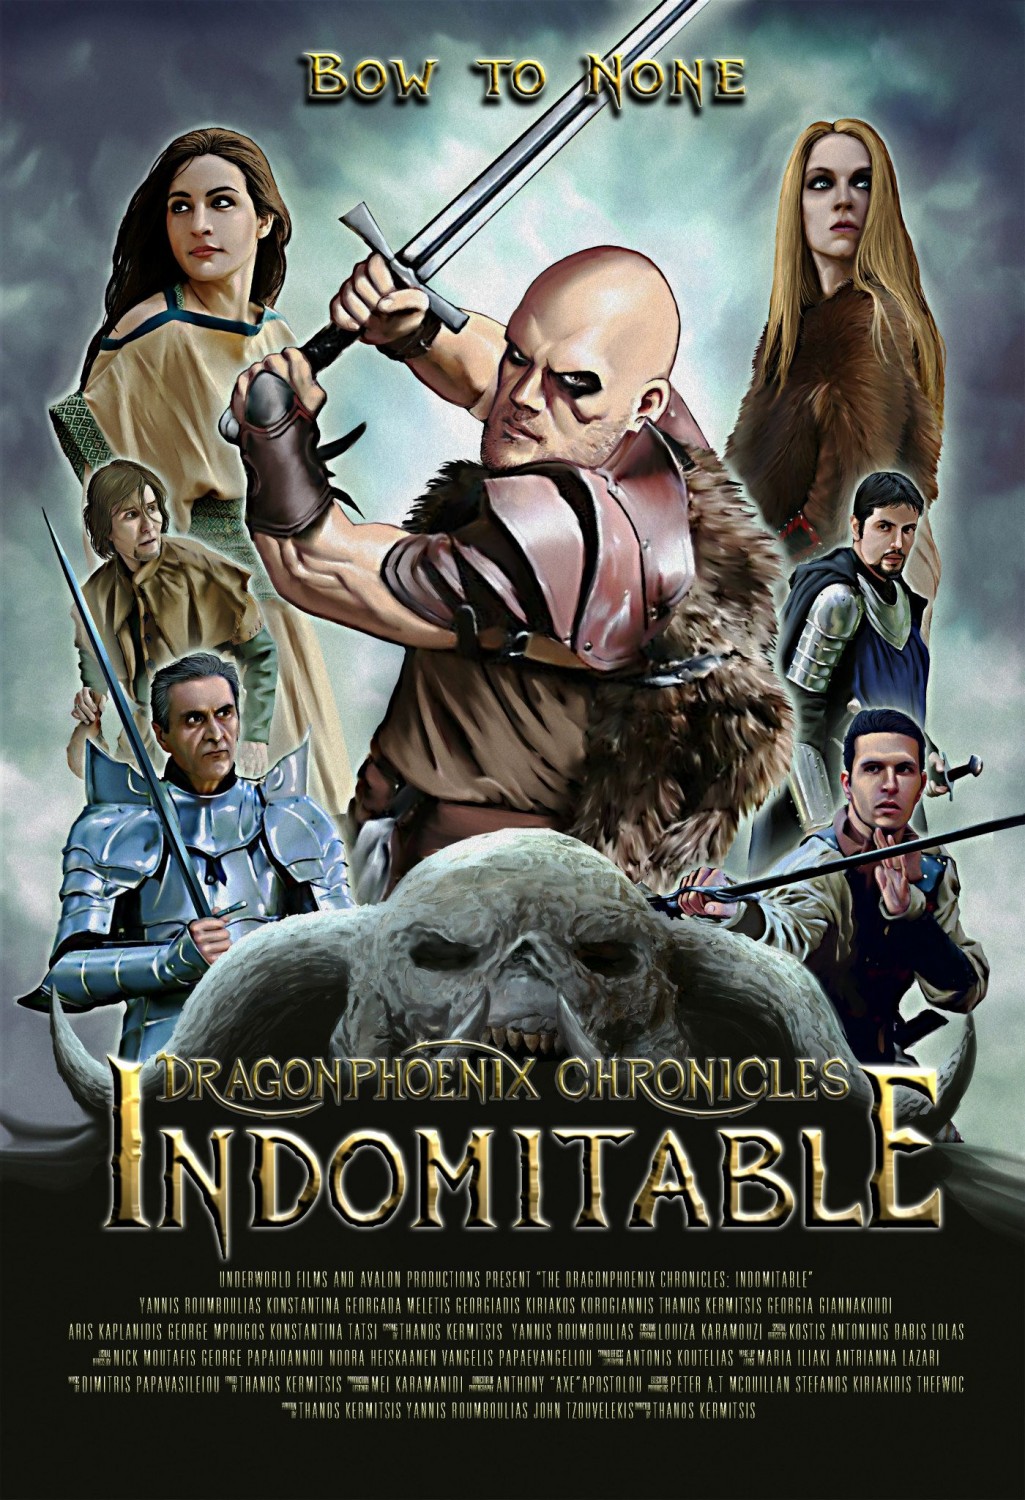 Extra Large Movie Poster Image for The Dragonphoenix Chronicles: Indomitable (#1 of 2)